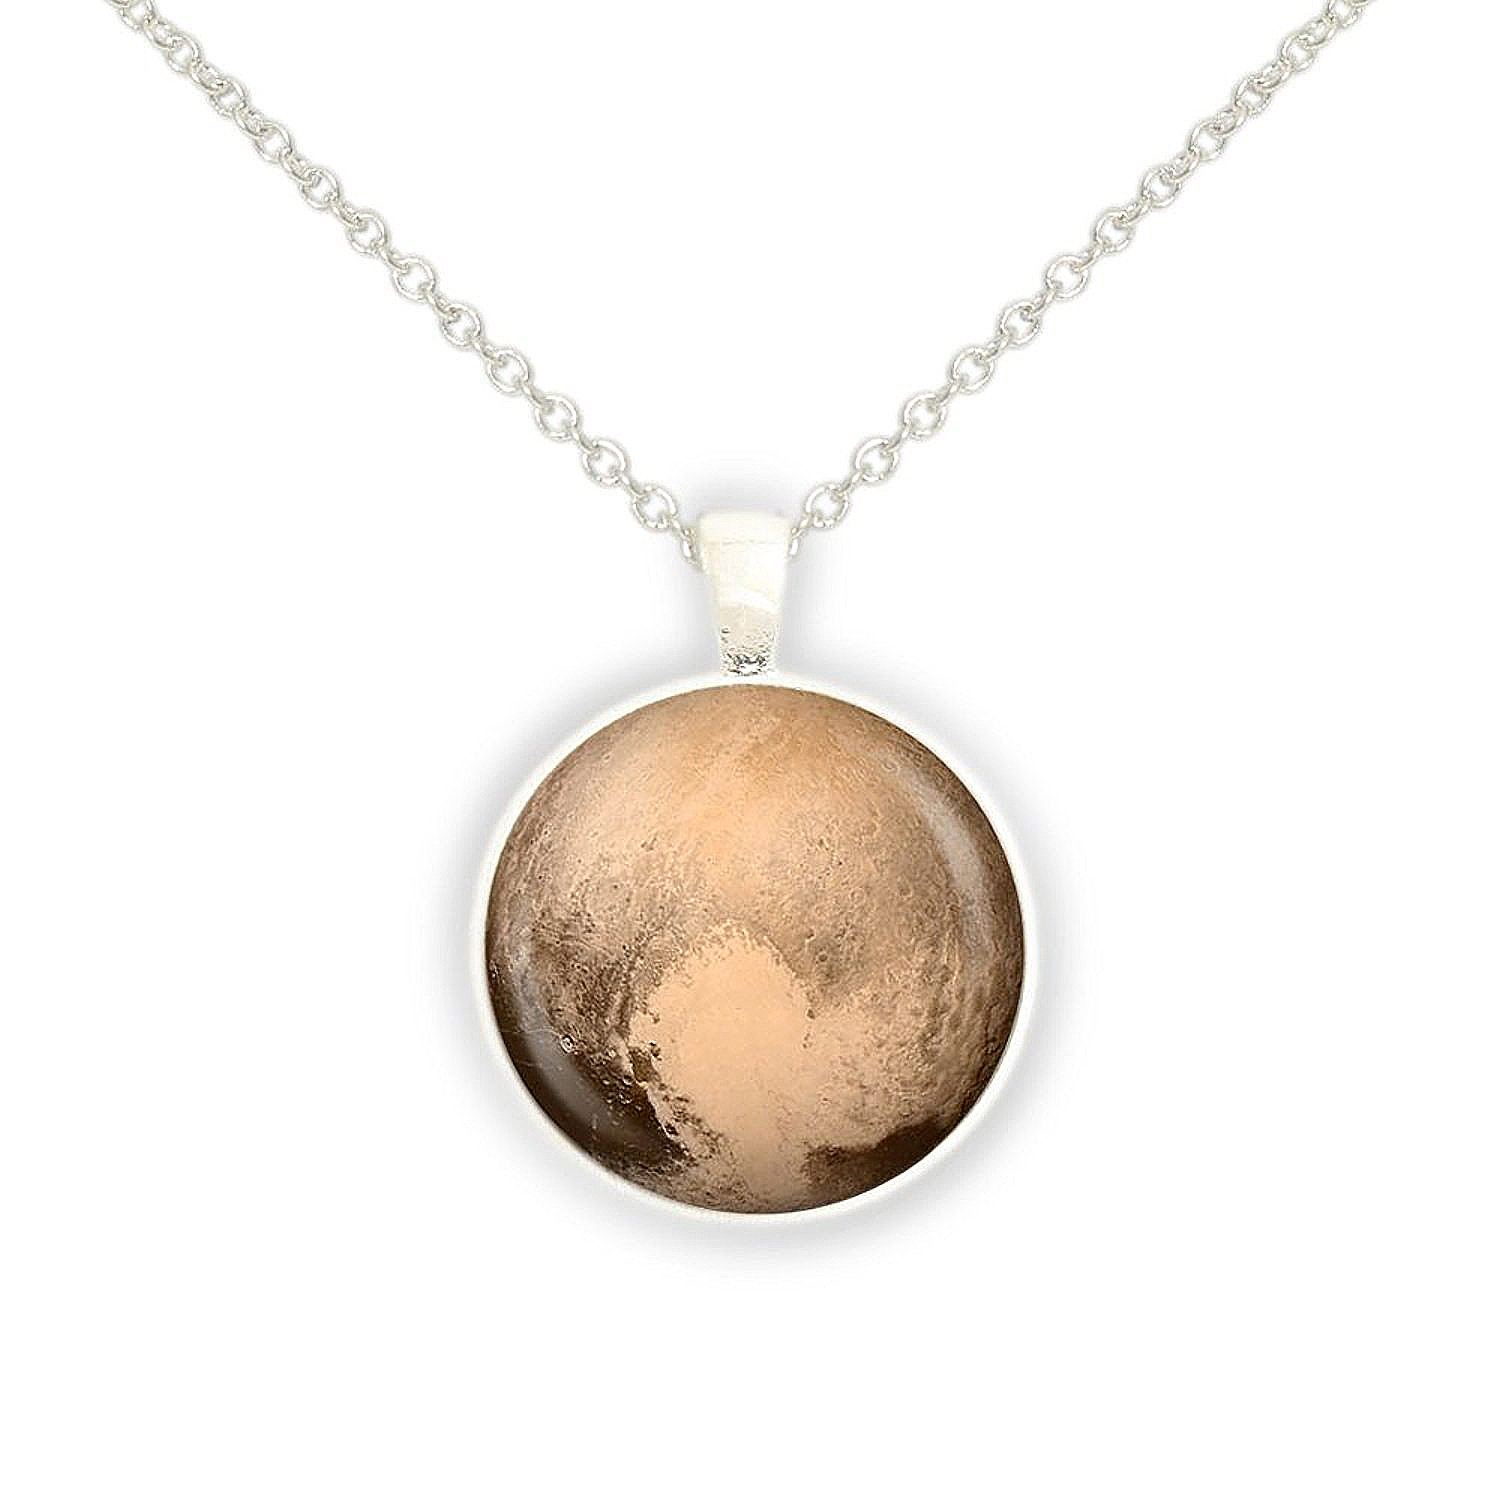 Pluto’s 'Heart' Necklace